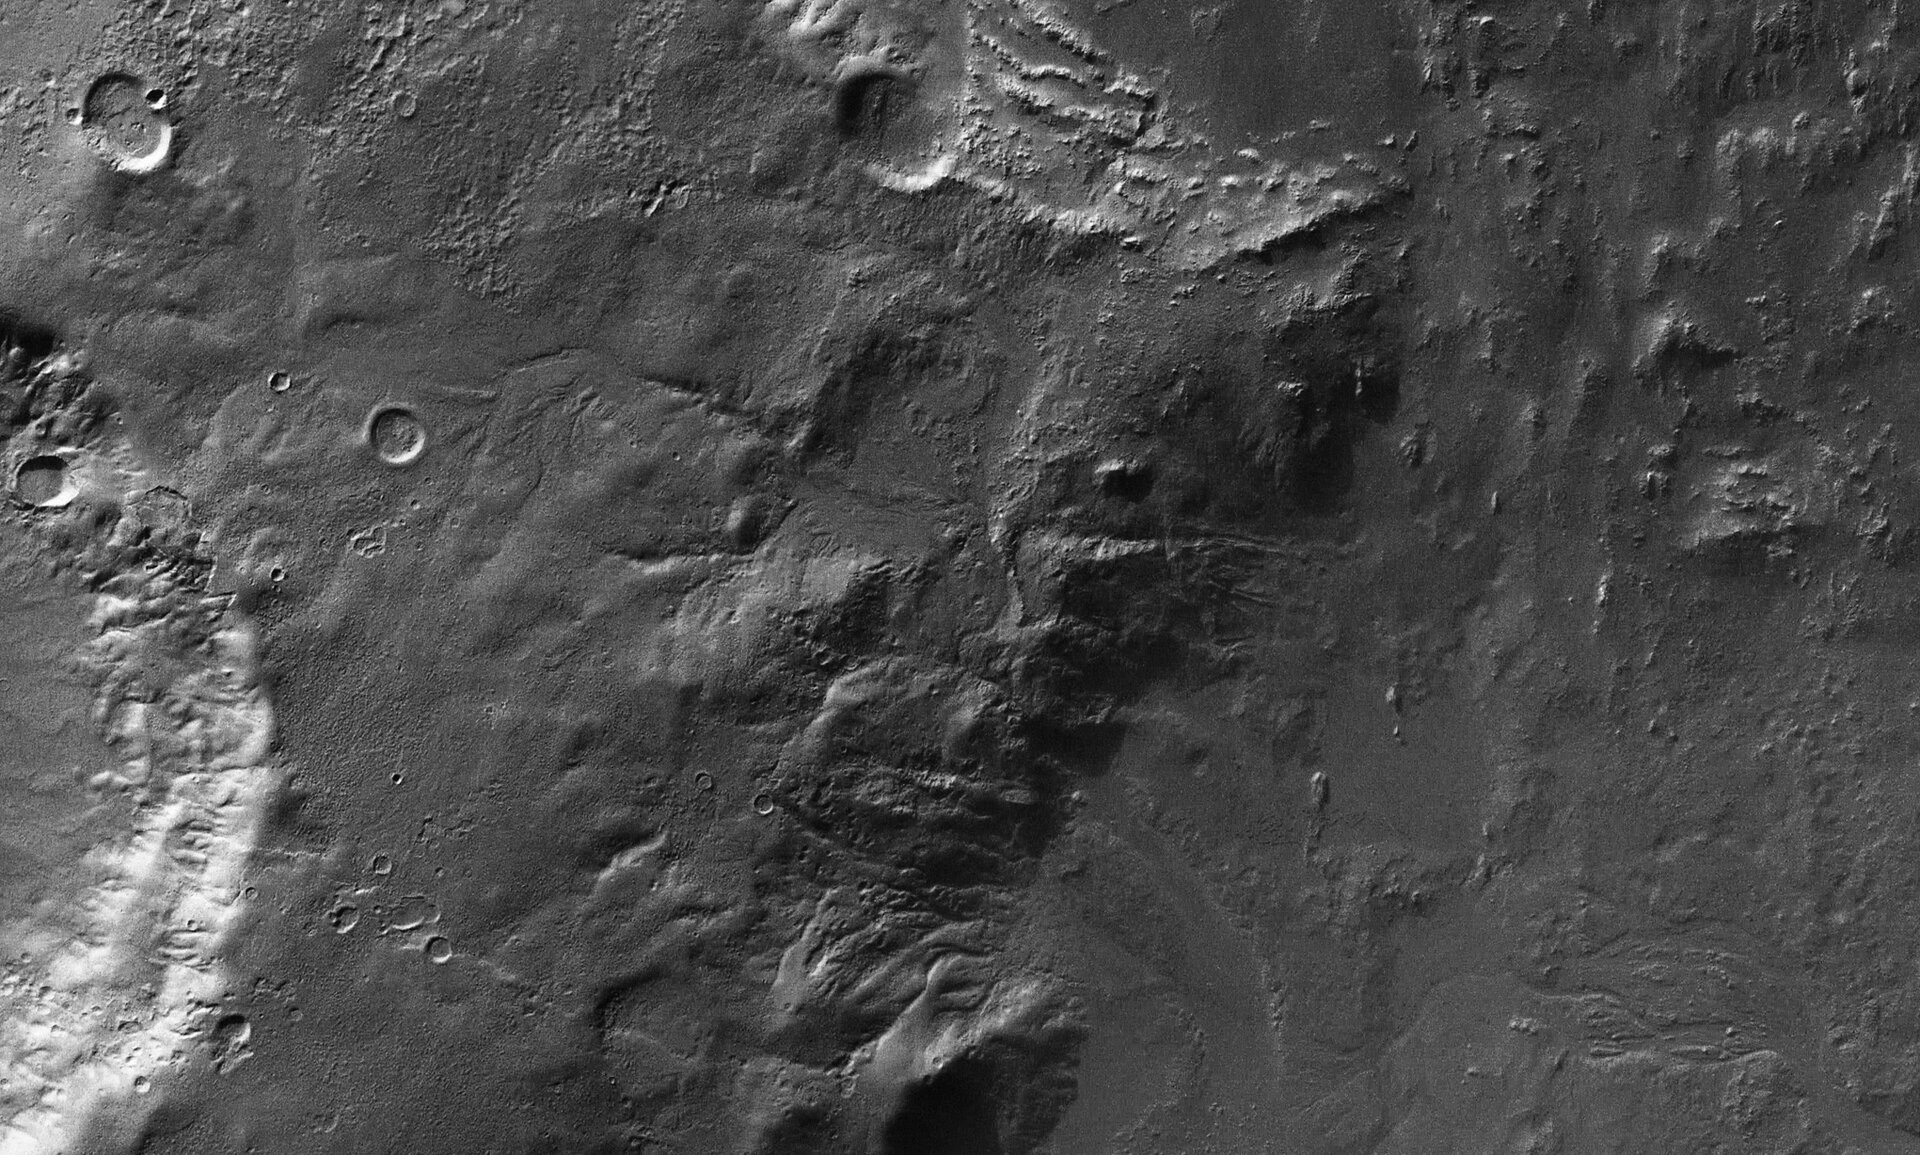 Close-up view of surface near Crater Hale